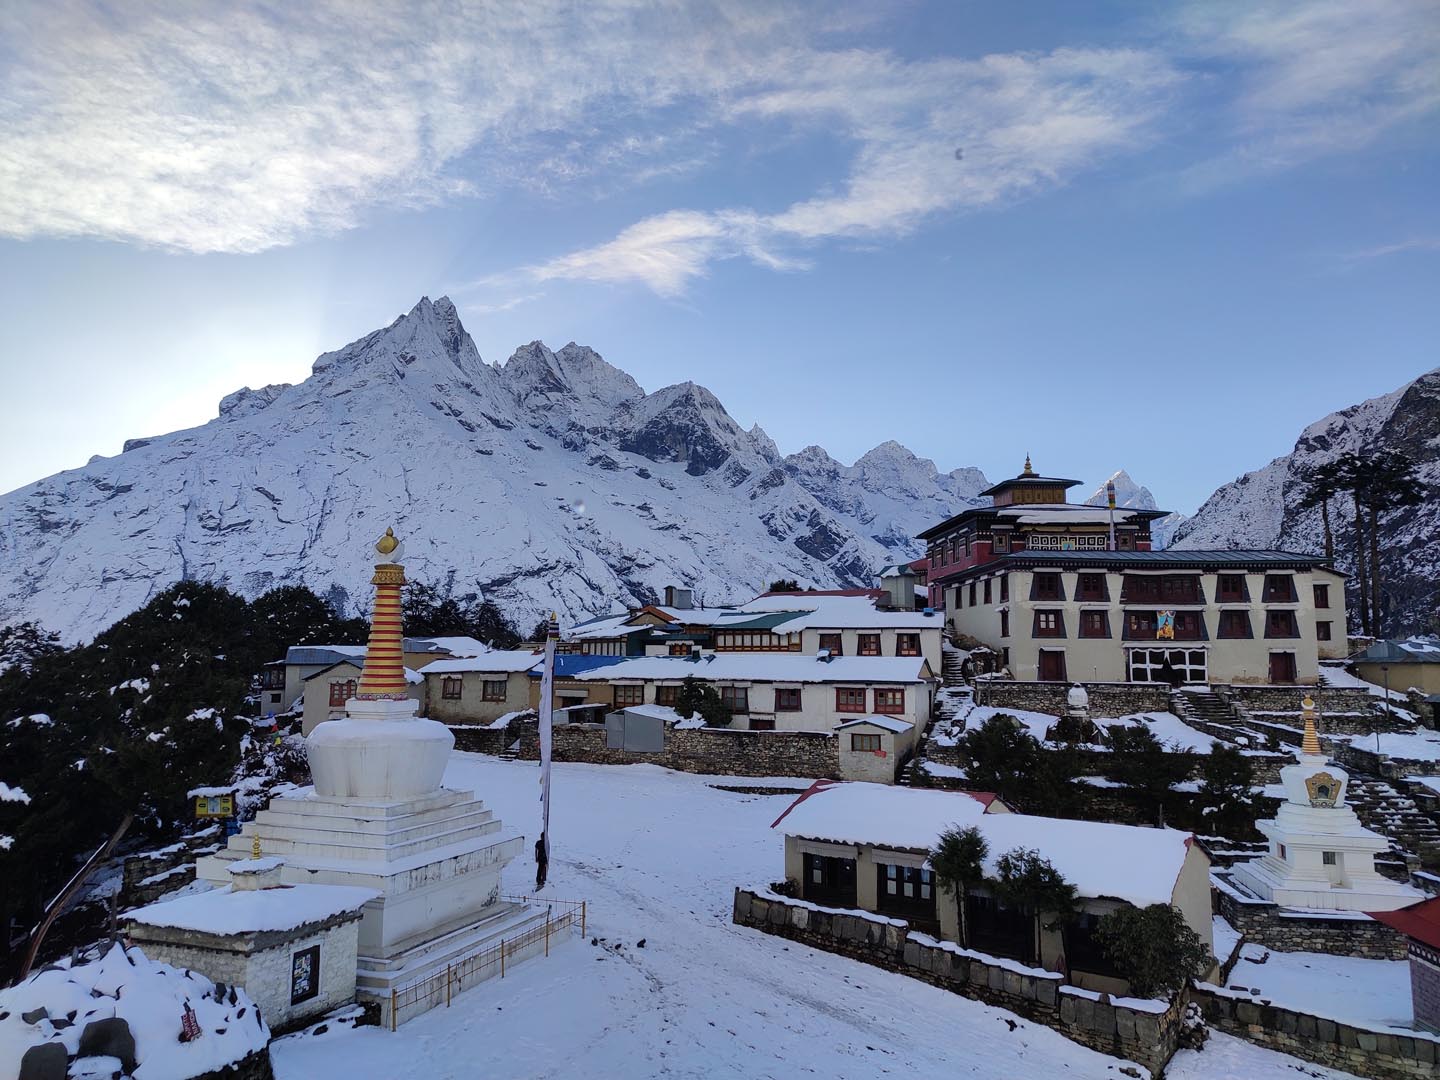 Tengboche Monastery covered in snow